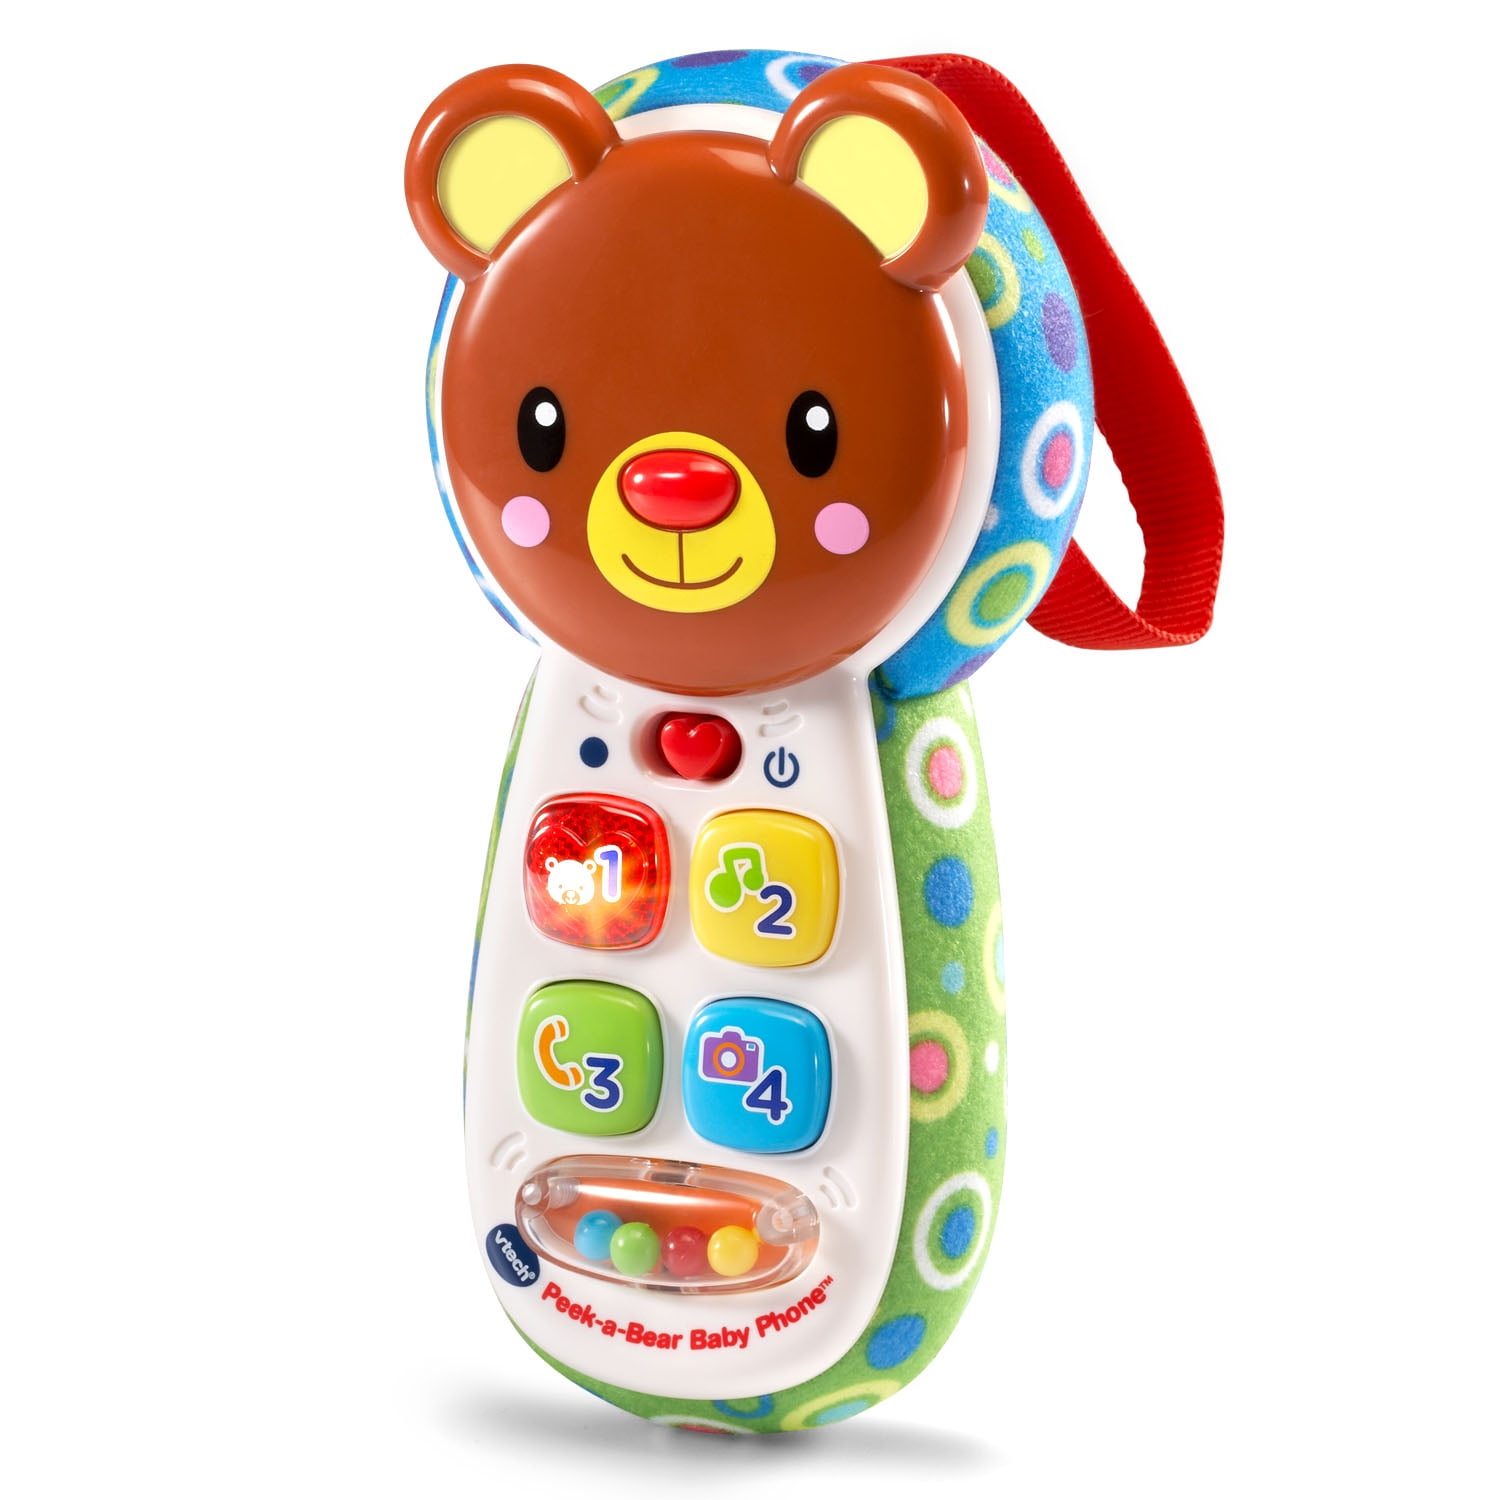 VTech Peek-a-Bear Baby Phone, Toy Phone with Lights and Music for Baby